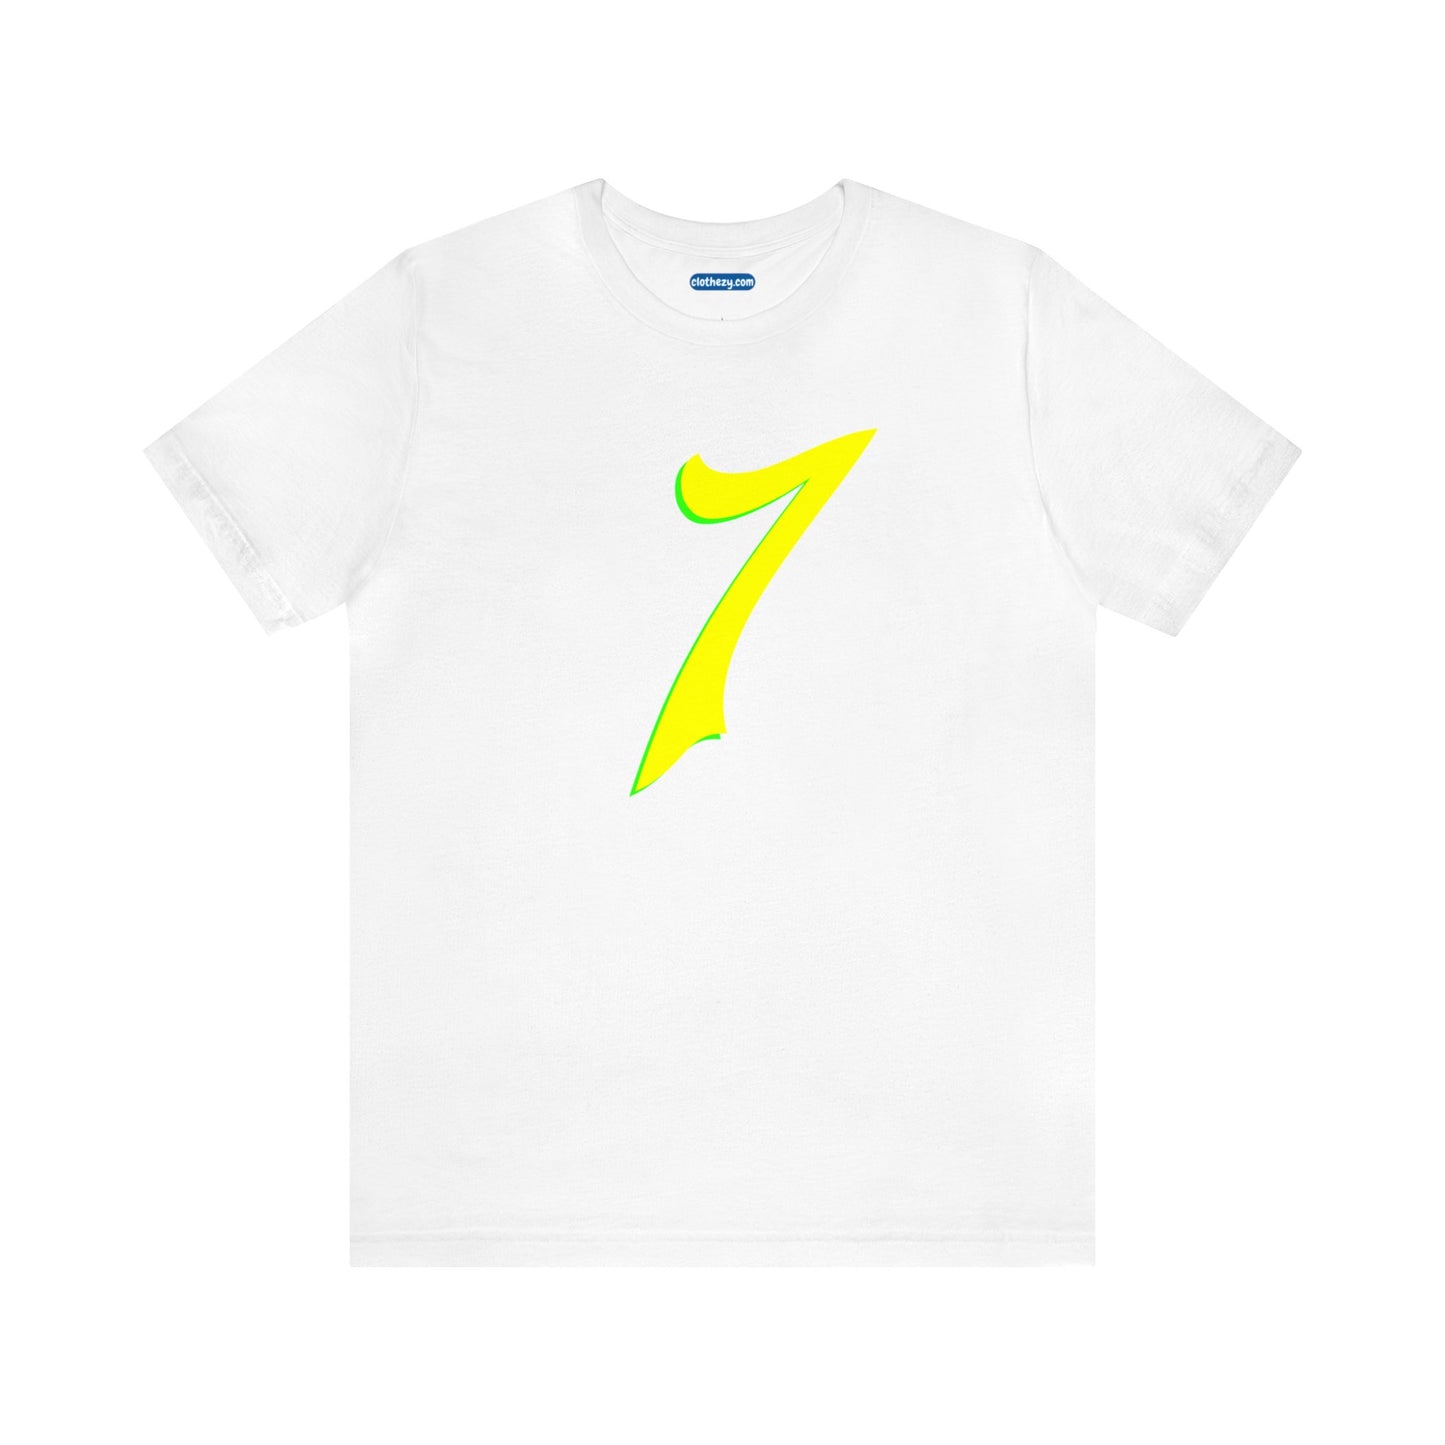 Number 7 Design - Soft Cotton Tee for birthdays and celebrations, Gift for friends and family, Multiple Options by clothezy.com in White Size Small - Buy Now